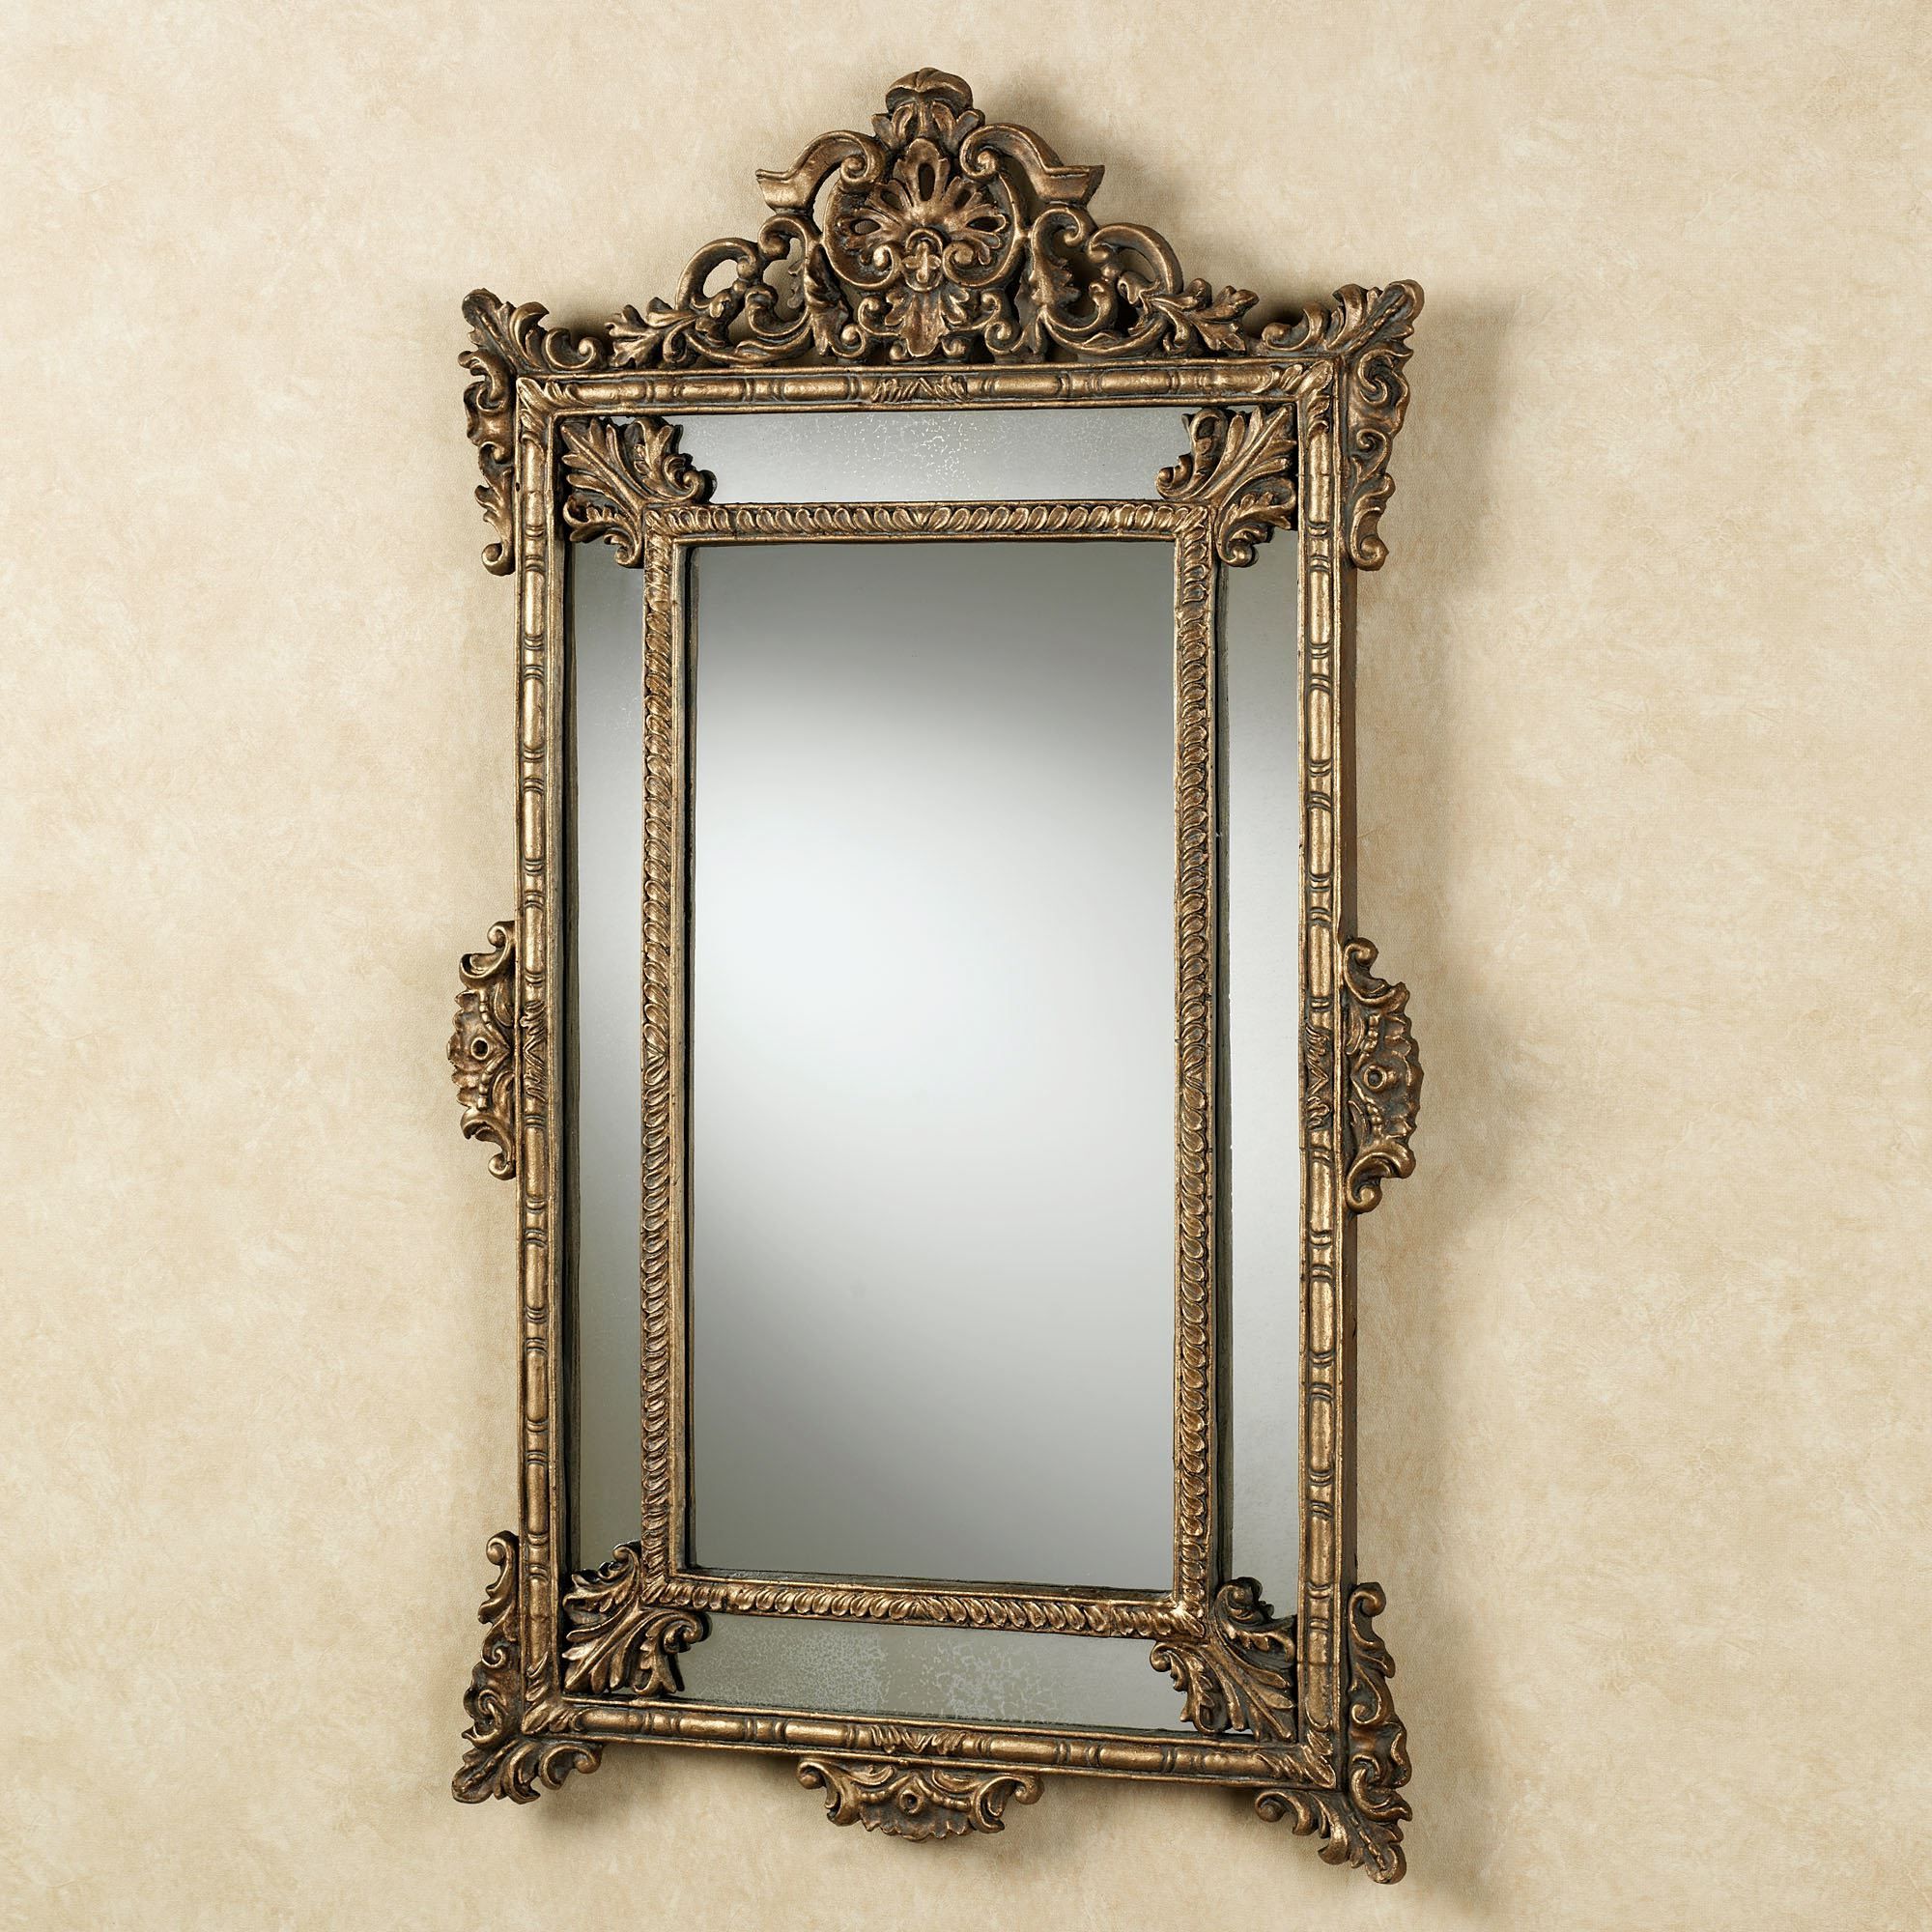 Popular Small Antique Wall Mirrors Throughout Vibrant Idea Antique Wall Mirror With Pair Of Small Mirrors Dutch (View 3 of 20)